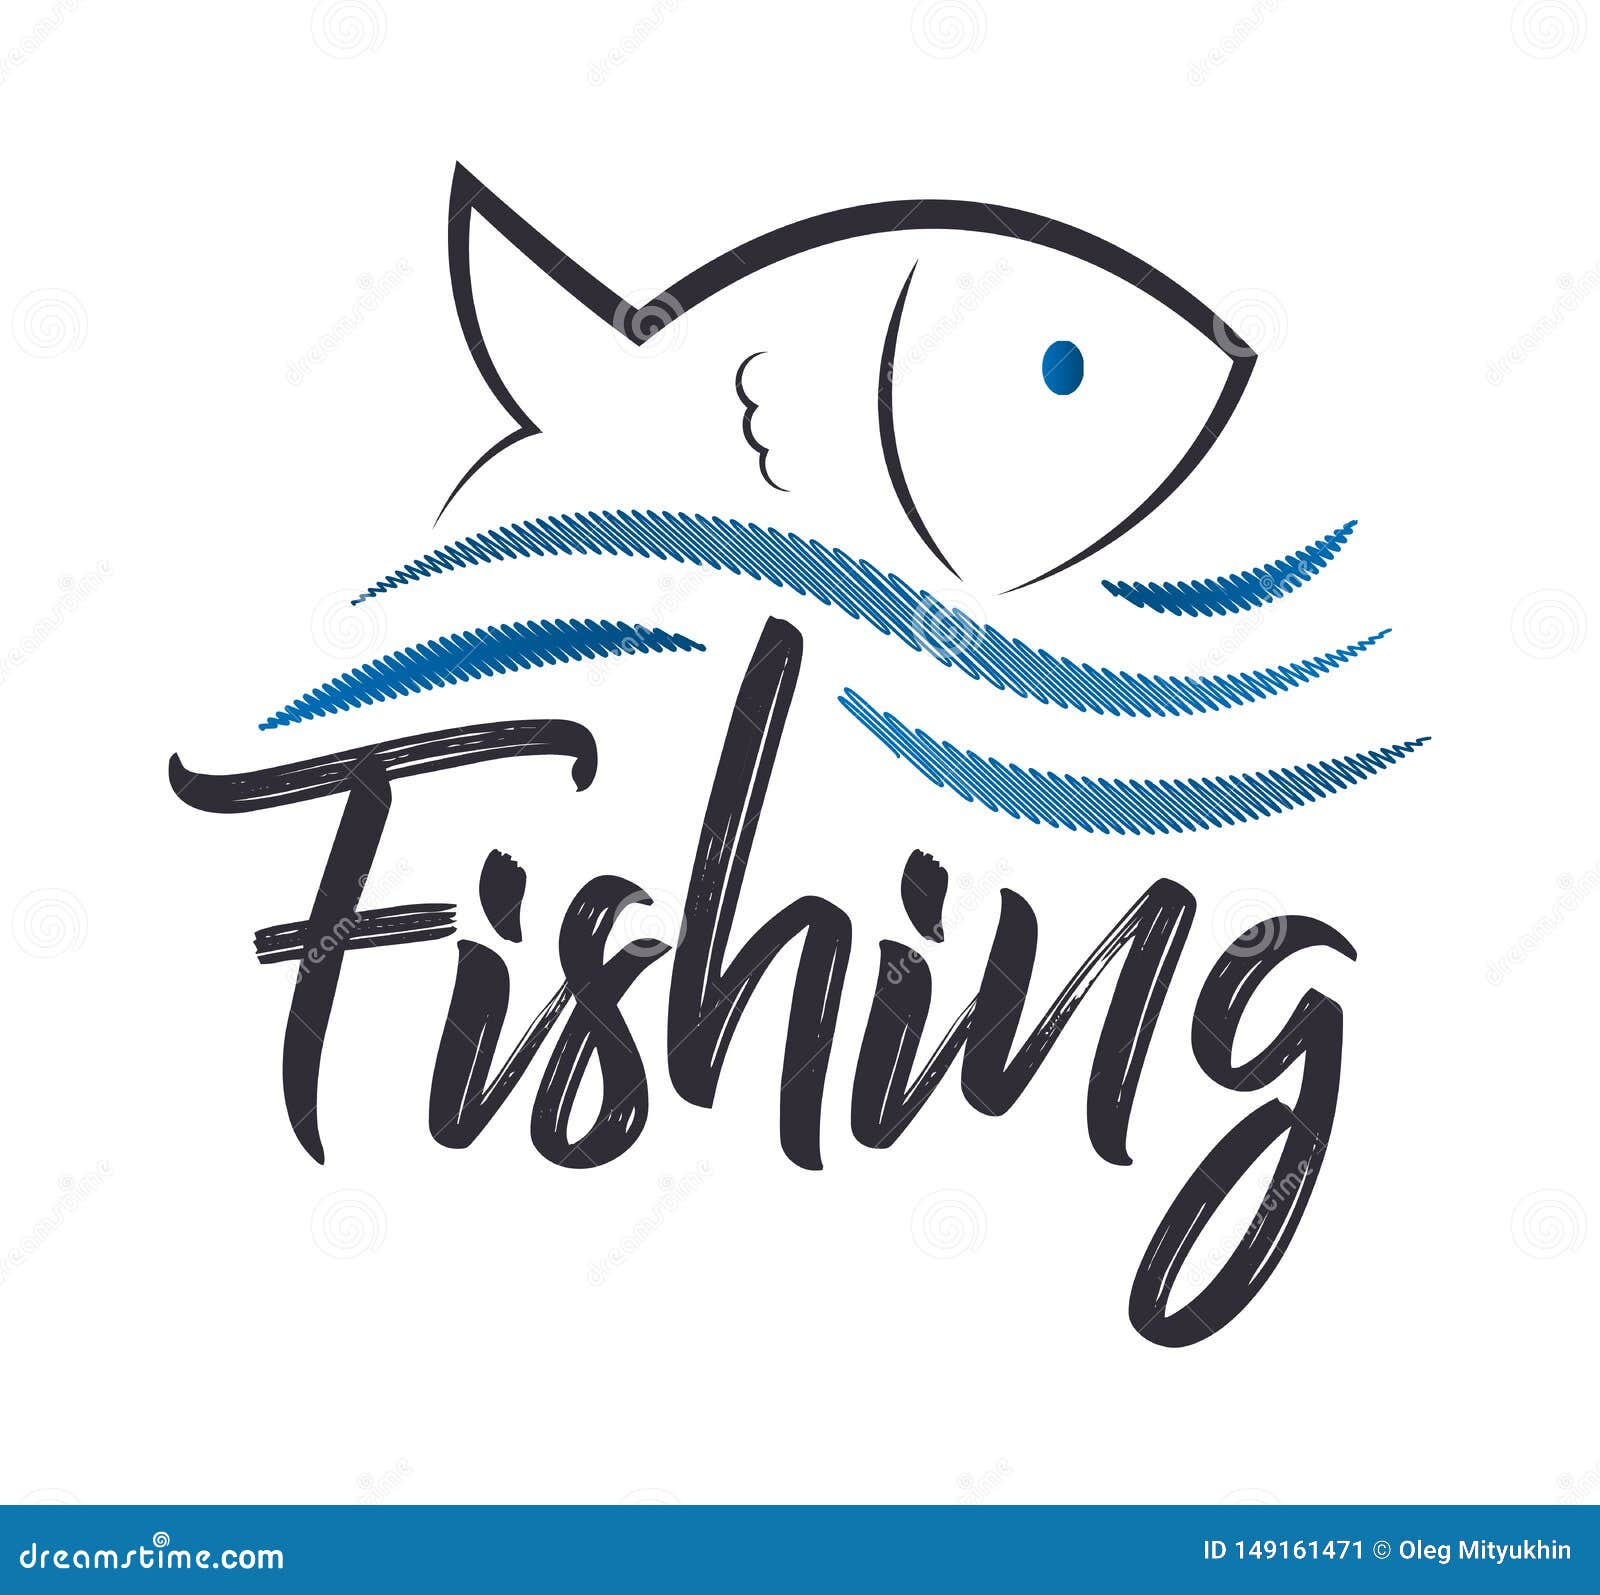 https://thumbs.dreamstime.com/z/creative-element-fishing-combination-wave-fish-unique-related-logo-149161471.jpg